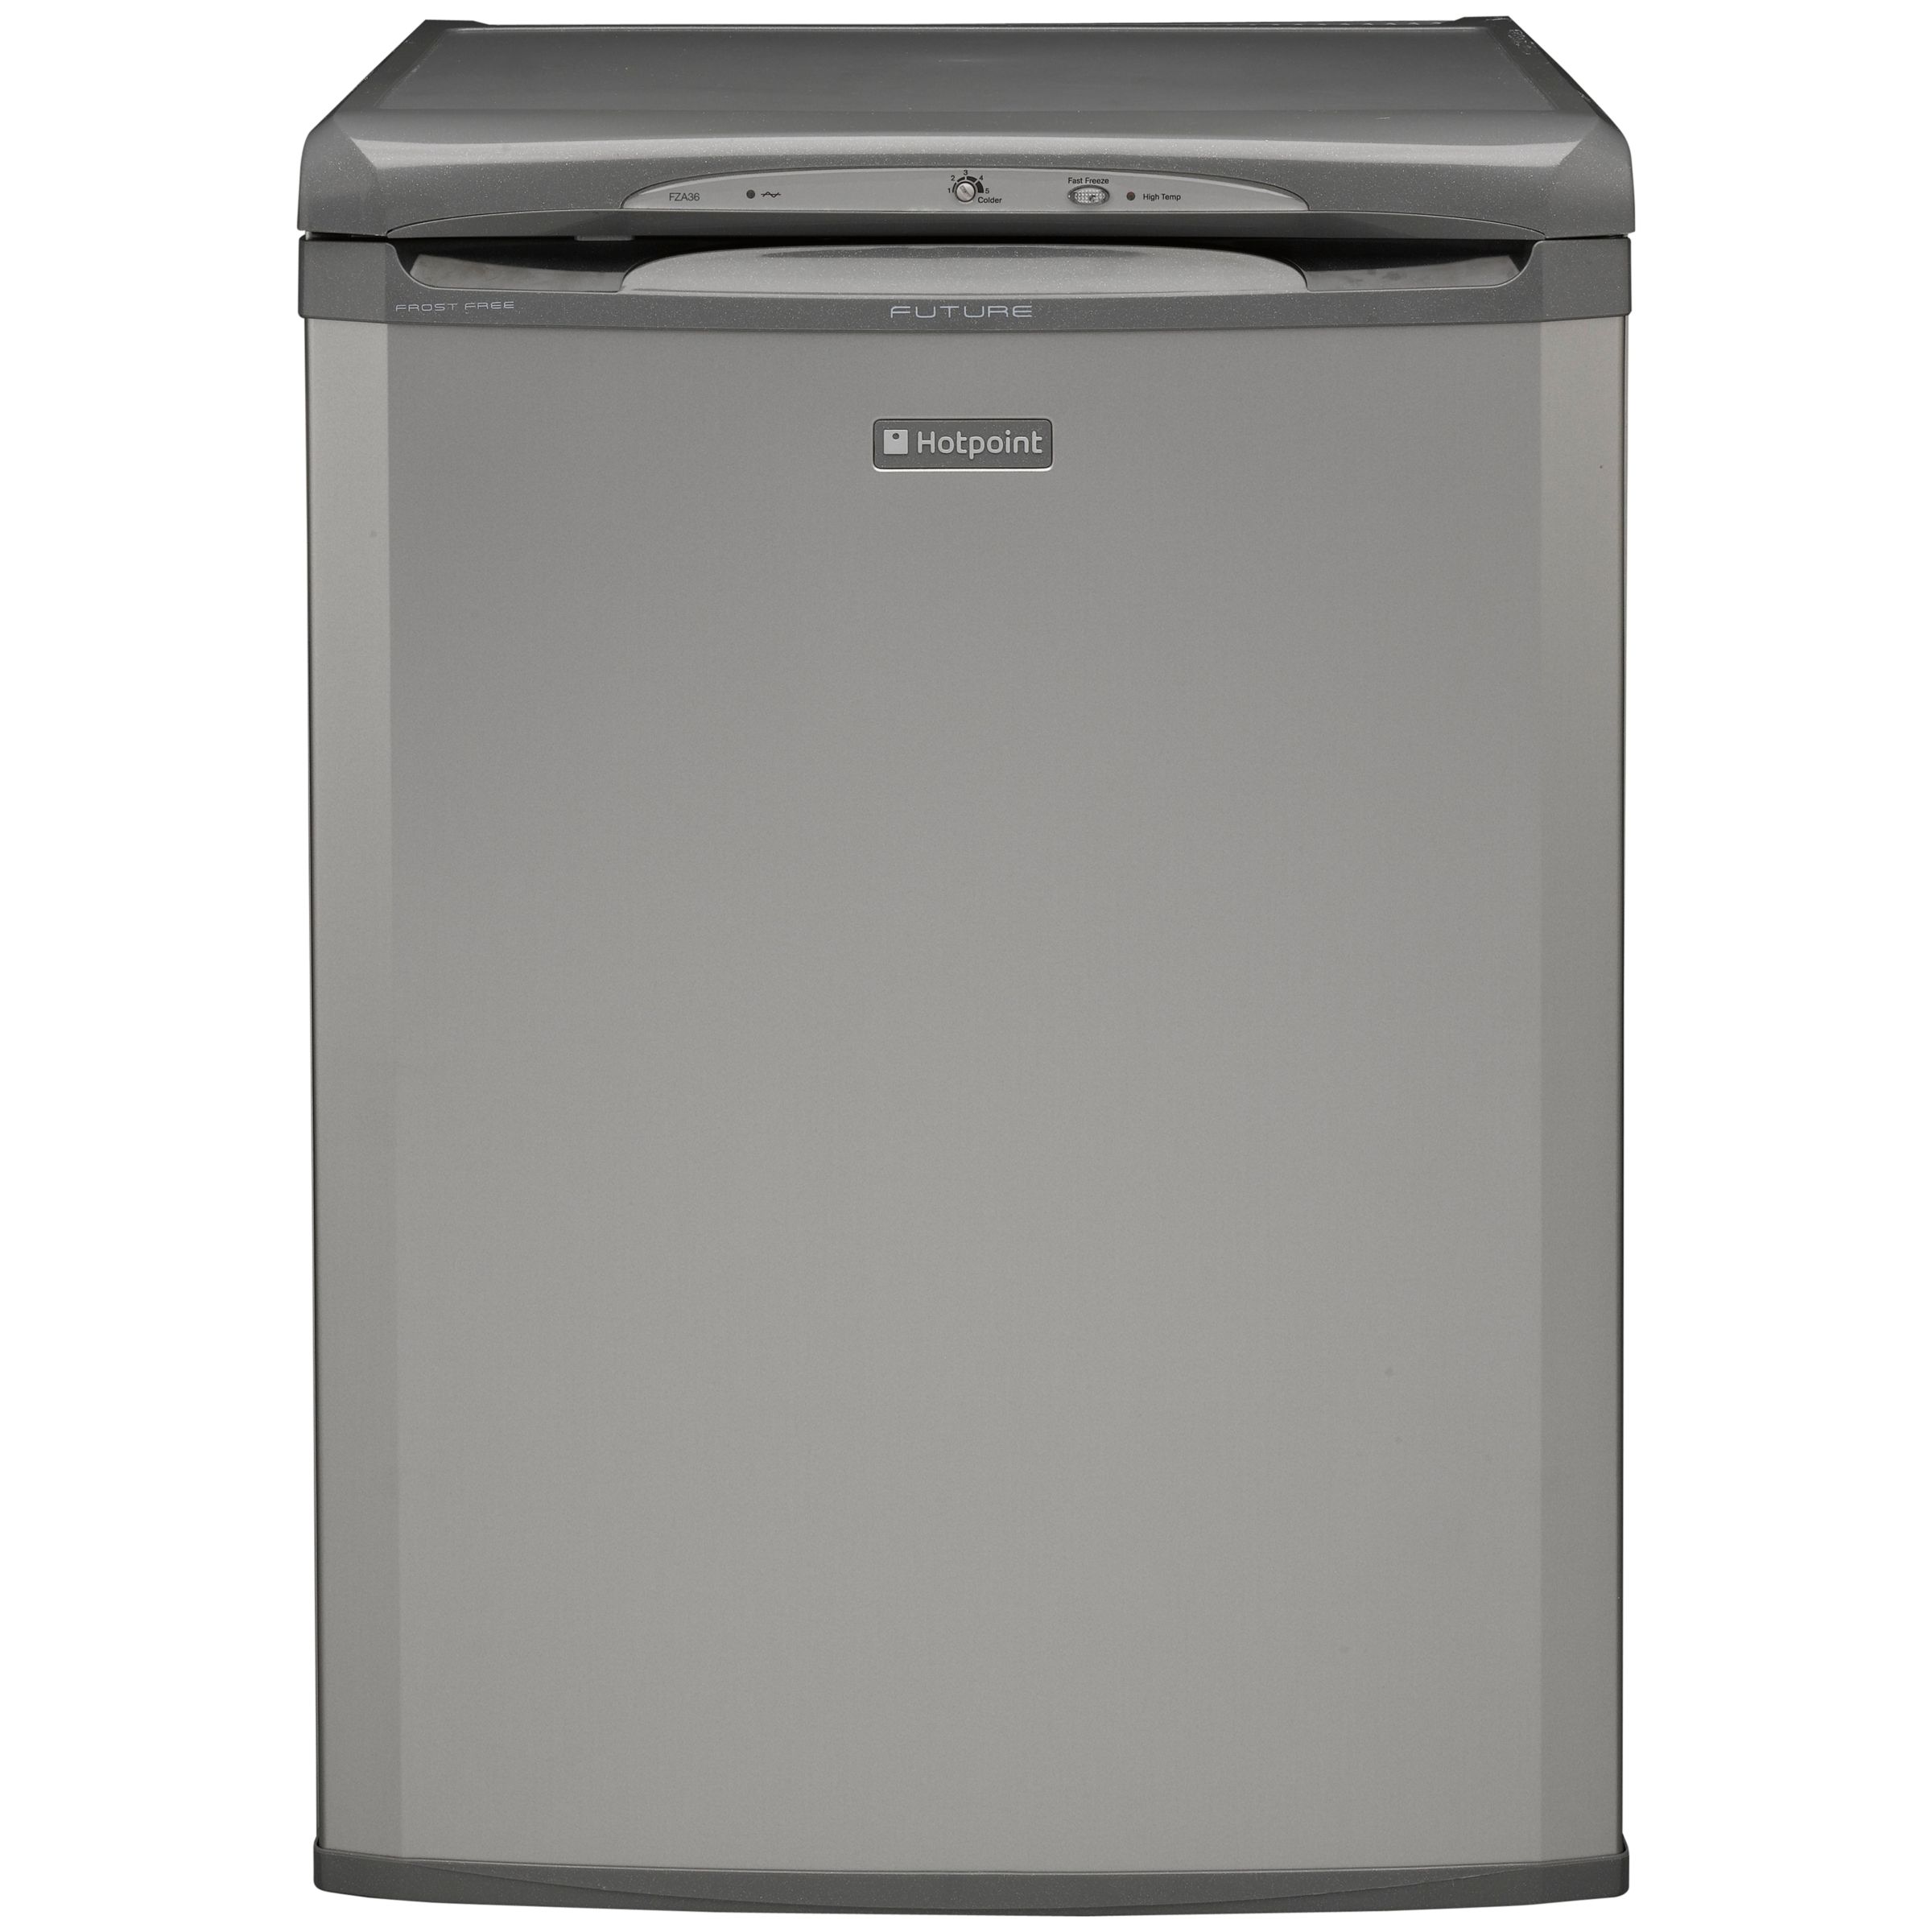 Hotpoint FZA36G Freezer, A+ Energy Rating, 60cm Wide, Graphite